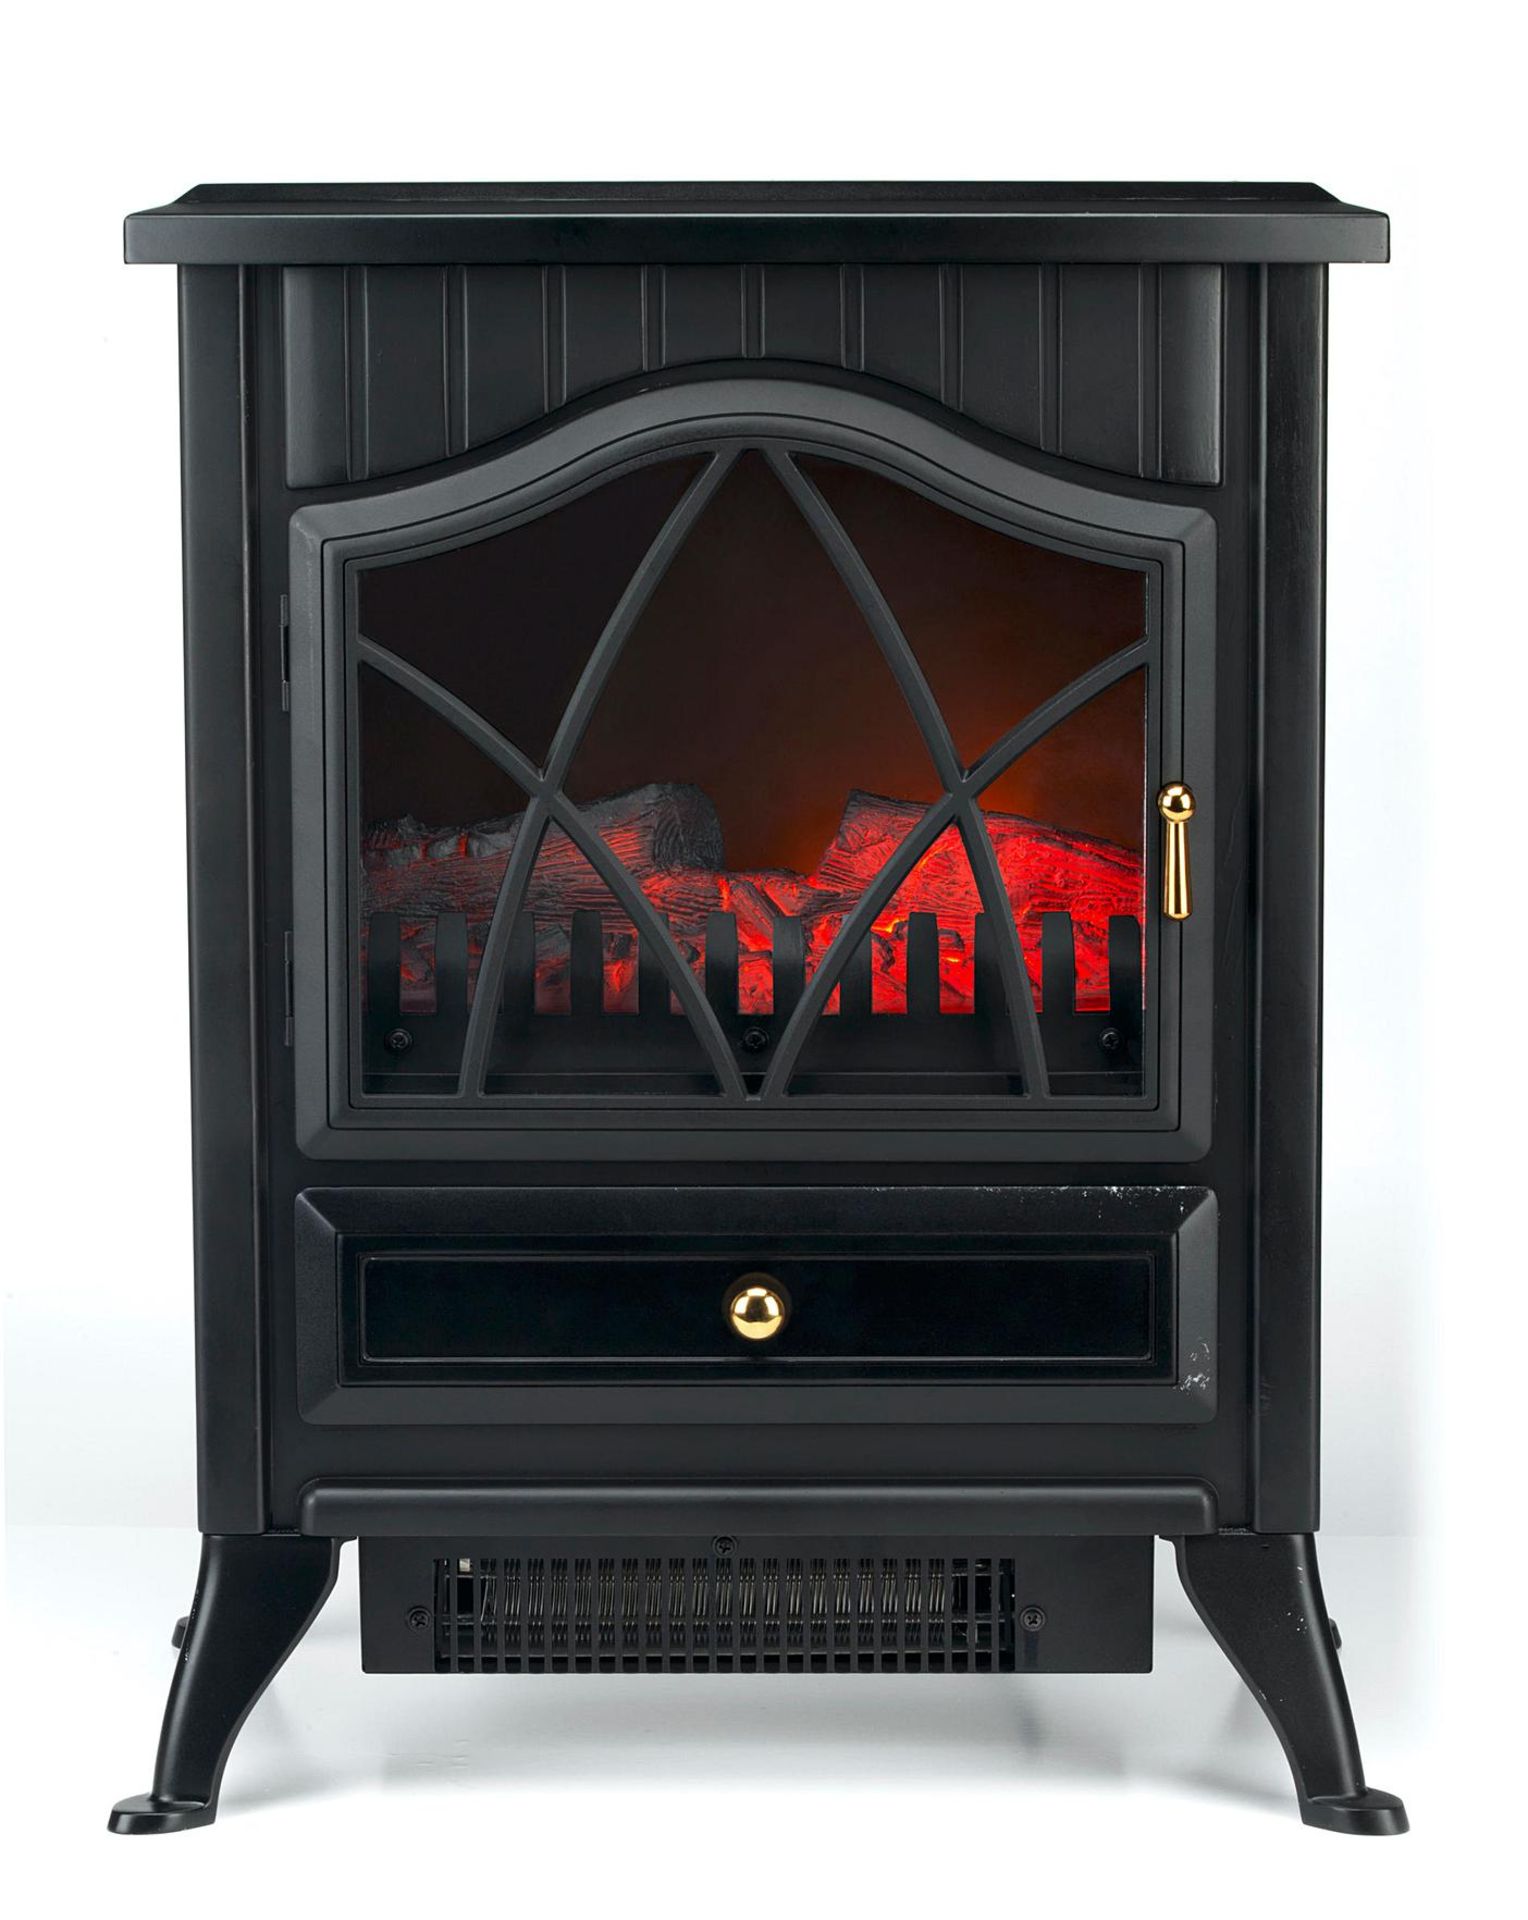 Beldray Oslo 1.8kW Black Electric Fire Stove RRP £199.98 (118031)